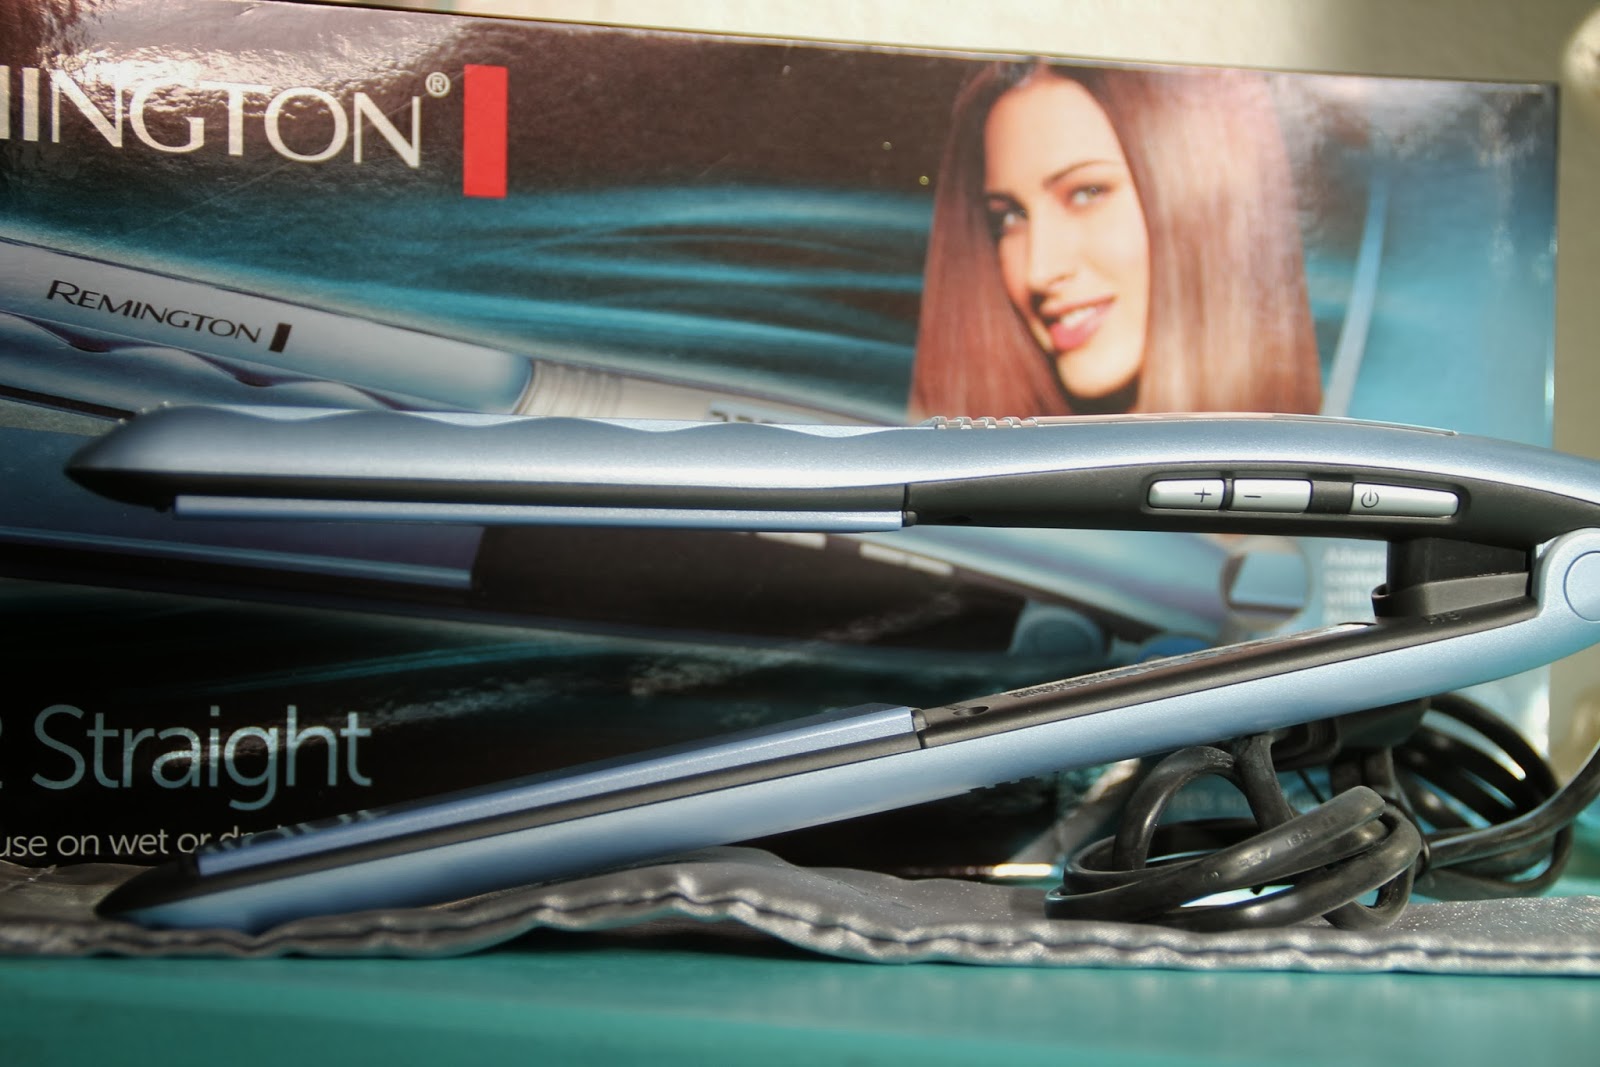 Crystal's Reviews: Remington Wet 2 Straight